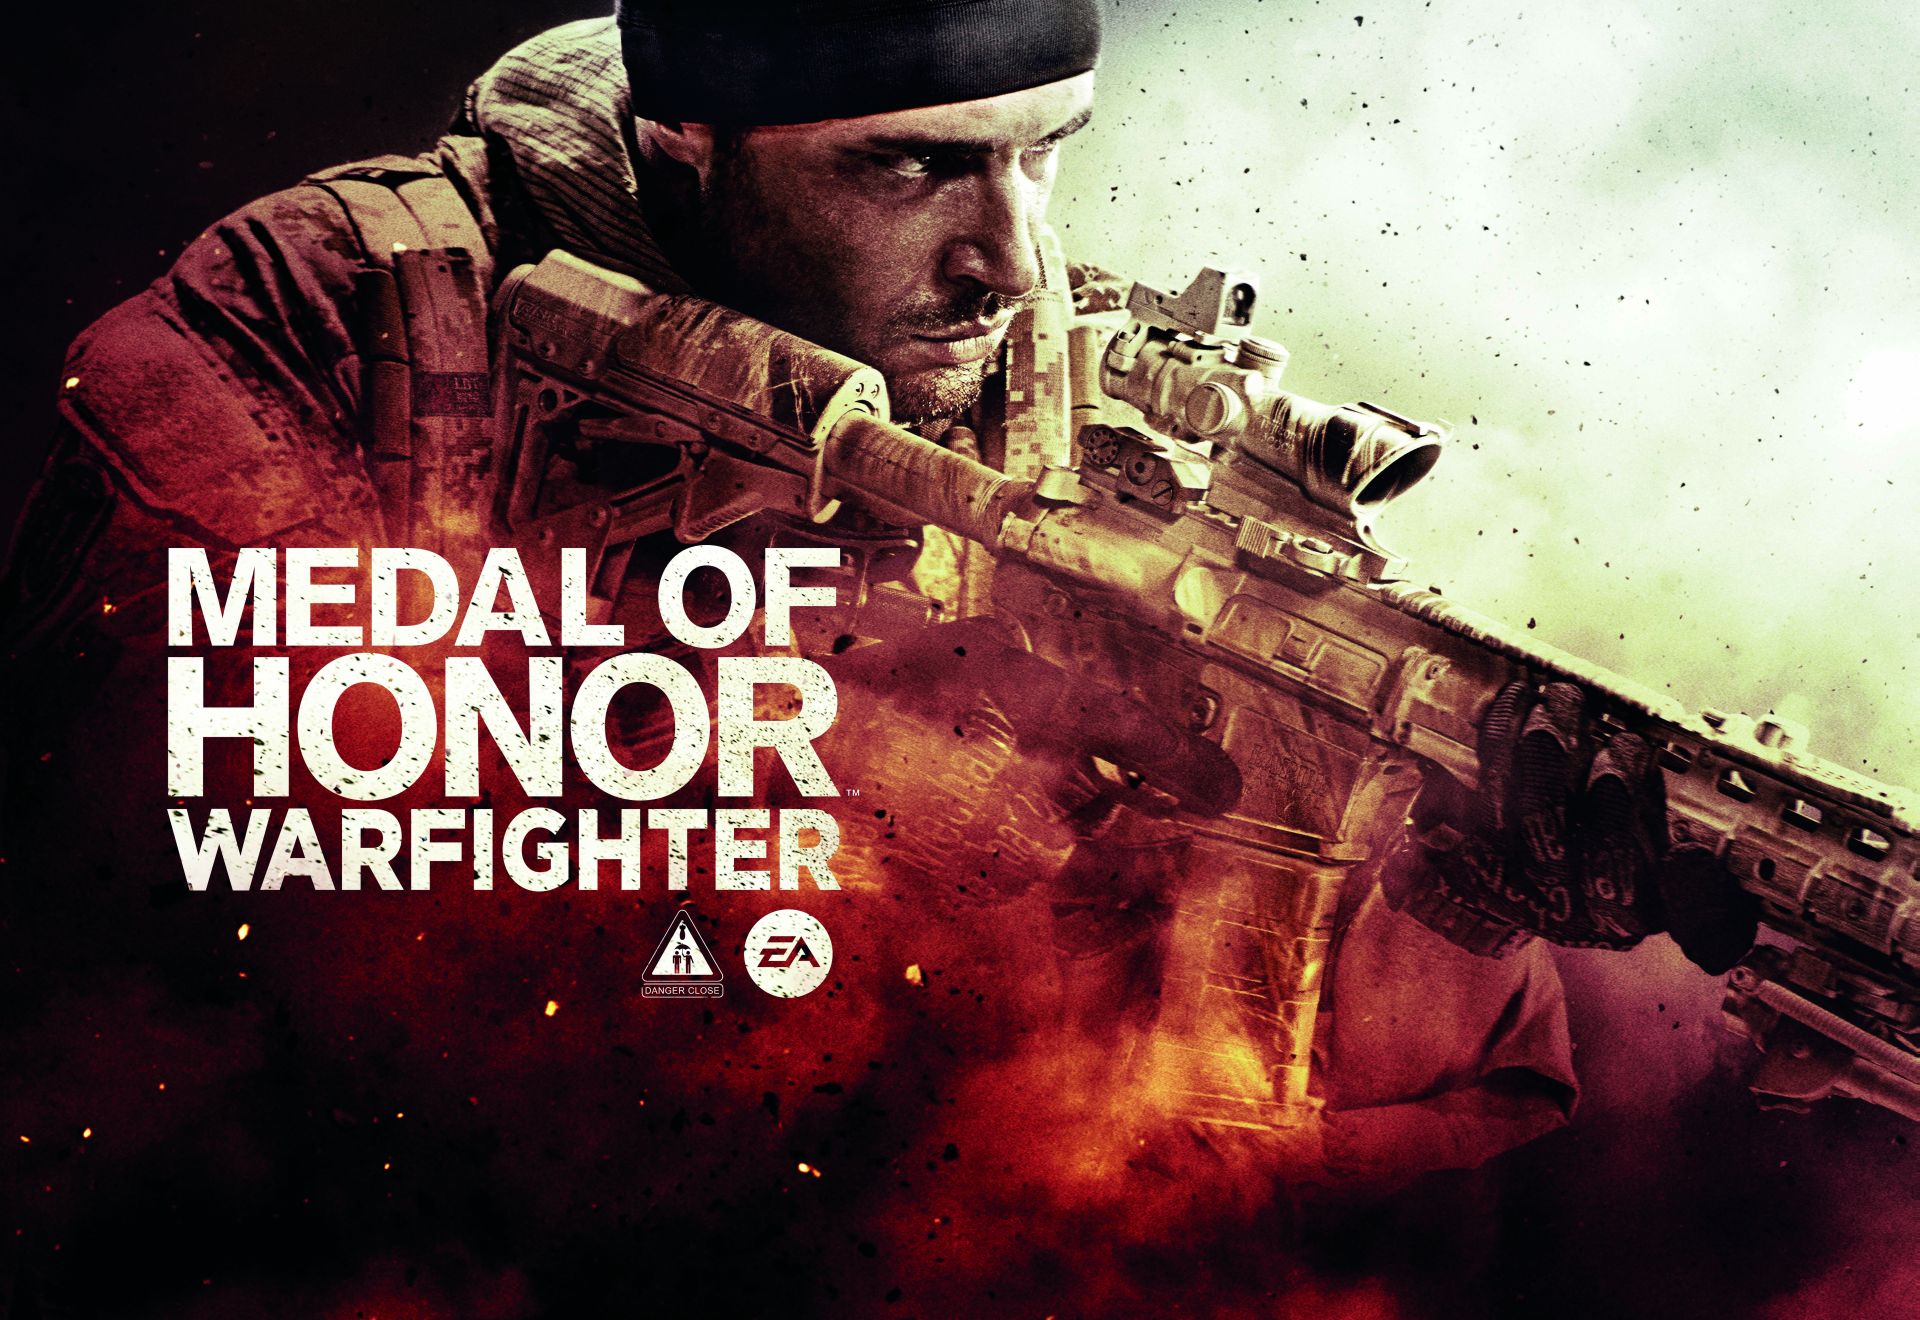 Medal of Honor: Warfighter looks to bring realism to the standard FPS